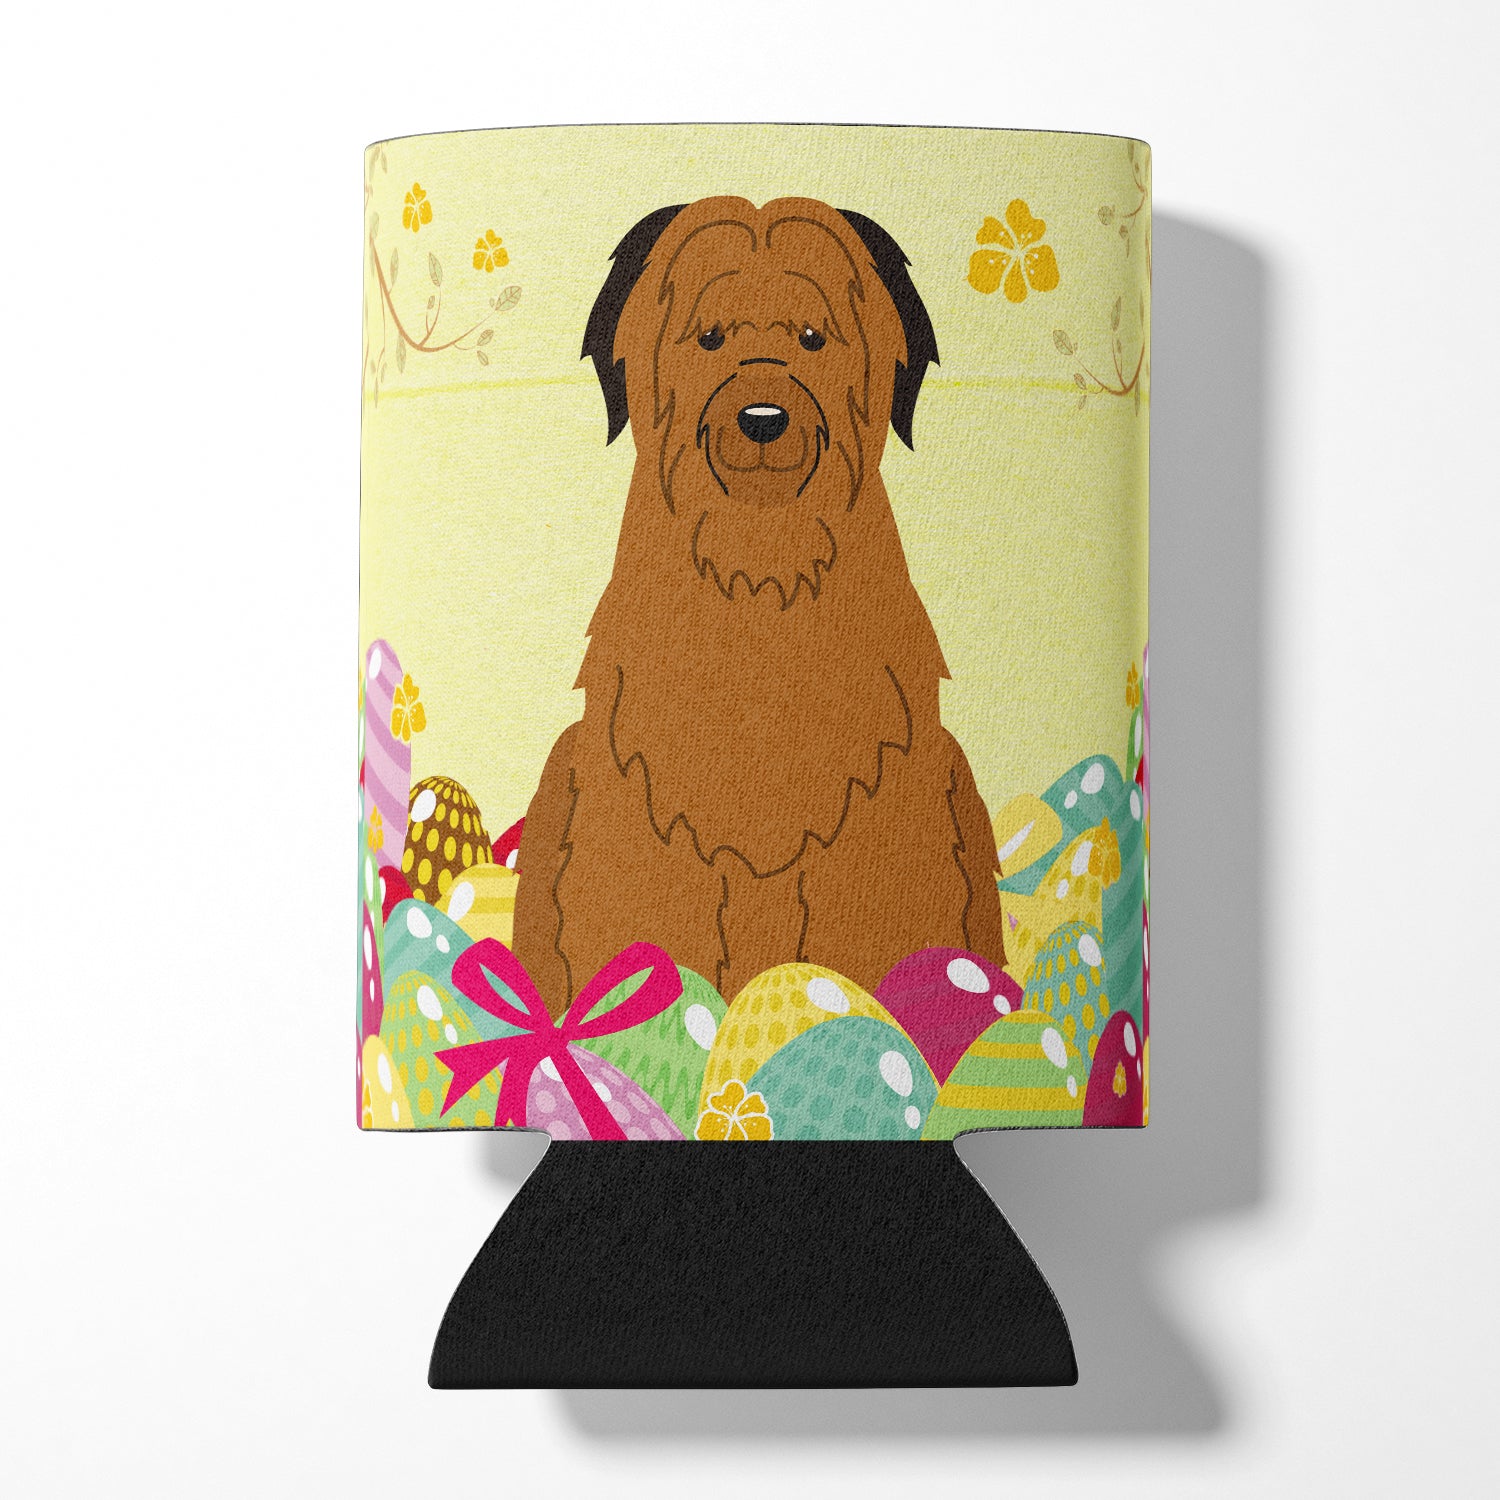 Easter Eggs Briard Brown Can or Bottle Hugger BB6082CC